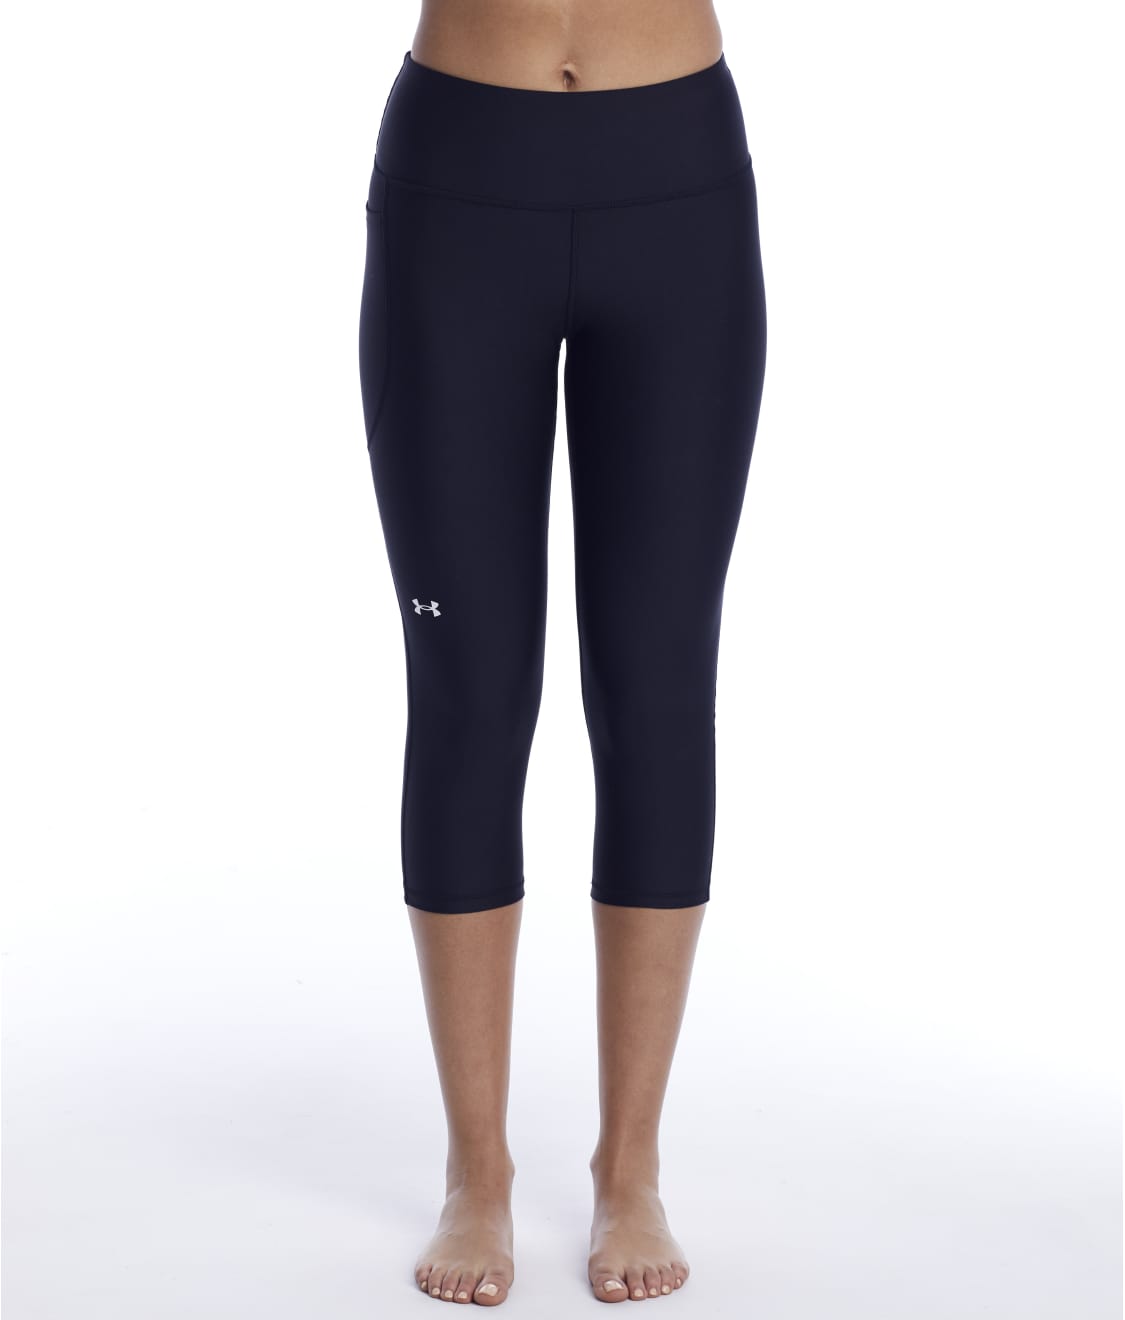 Why You Should Consider Wearing Compression Capris - Green Apple Active